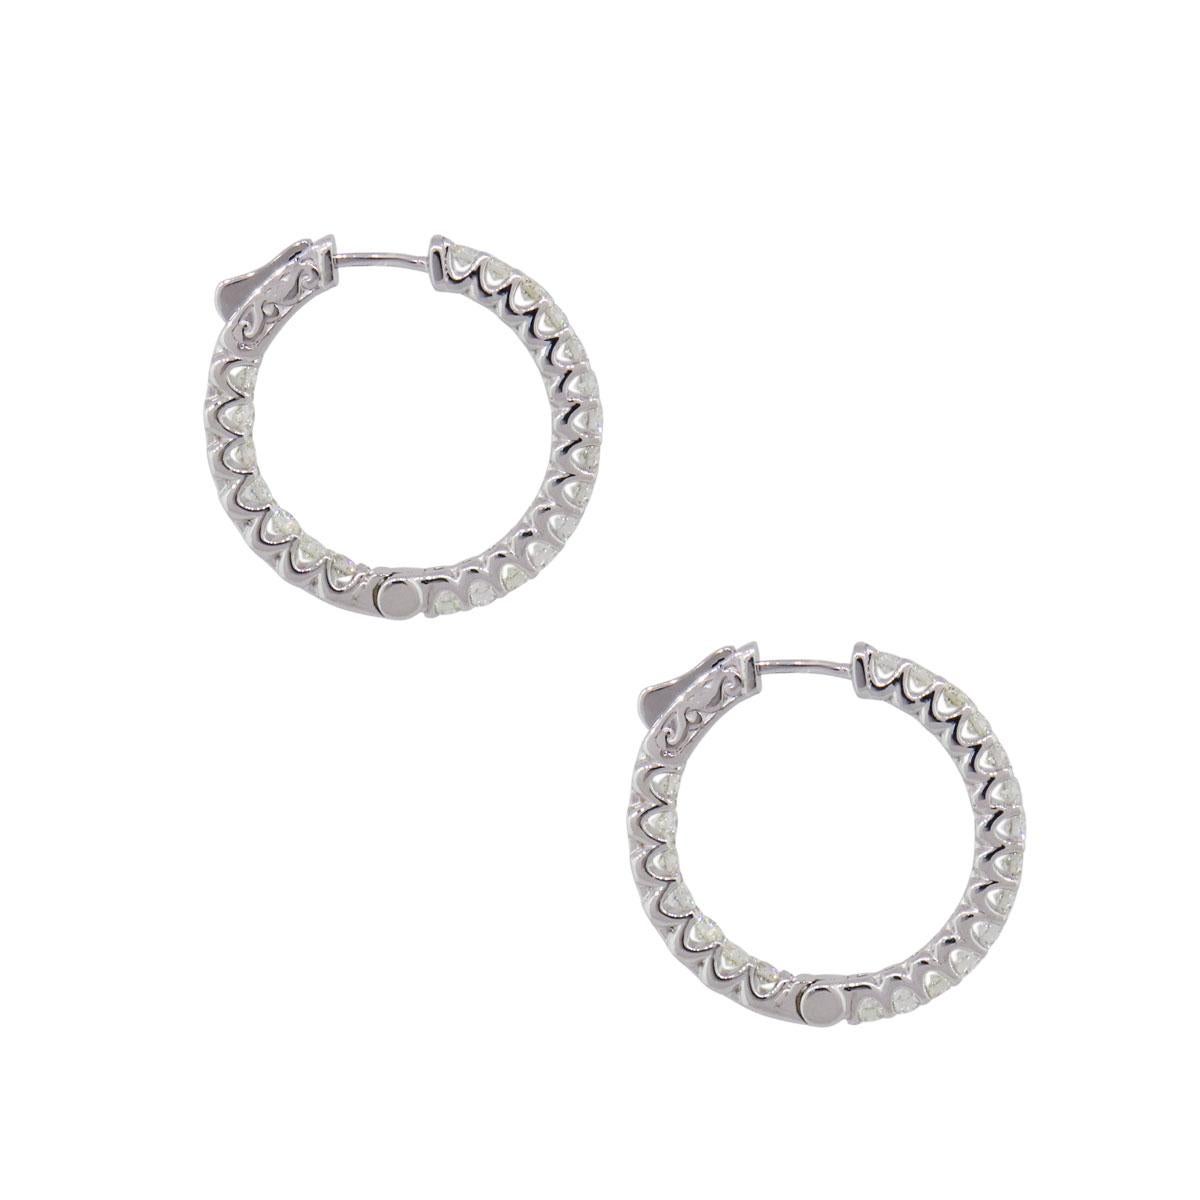 Material: 14k white gold
Diamond Details: Approximately 2.05ctw of round brilliant diamonds. Diamonds are G/H in color and VS in clarity.
Measurements: 1″ x 0.14″ x 1″
Earrings Backs: Hoop
Total Weight: 8.1g (5.2dwt)
Additional Details: This item